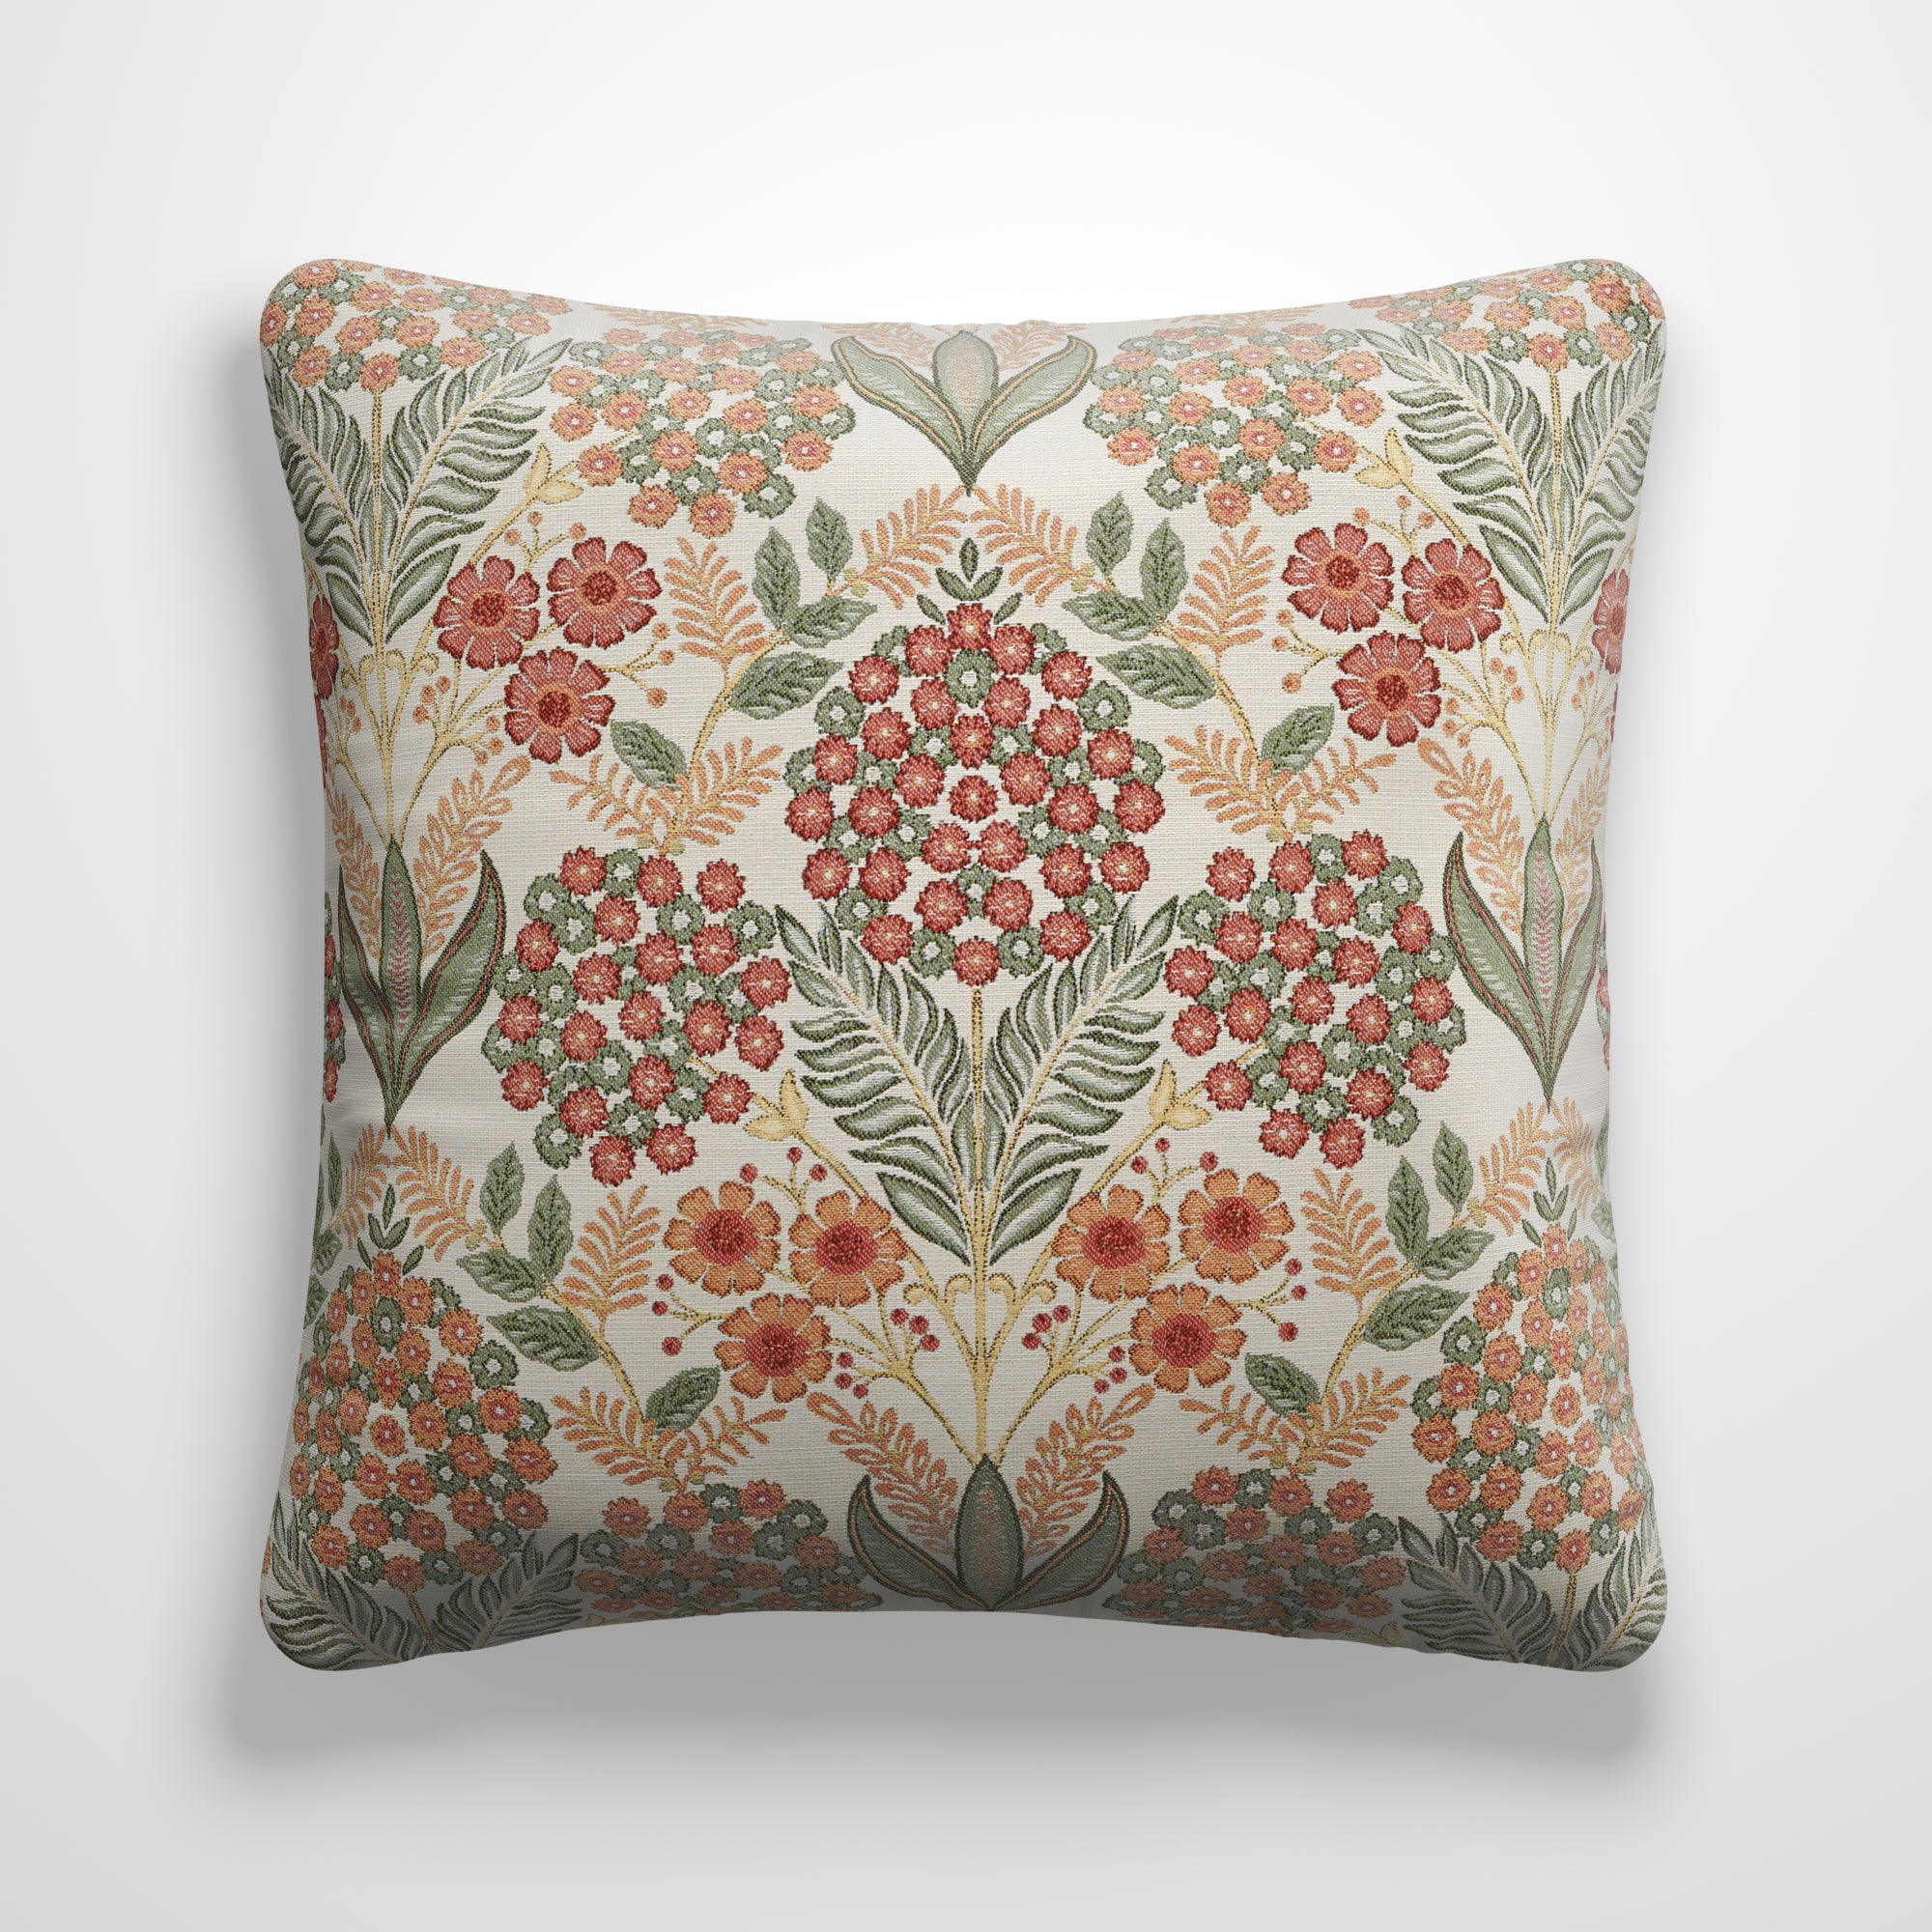 Wilmington Made to Order Cushion Cover Wilmington Spice